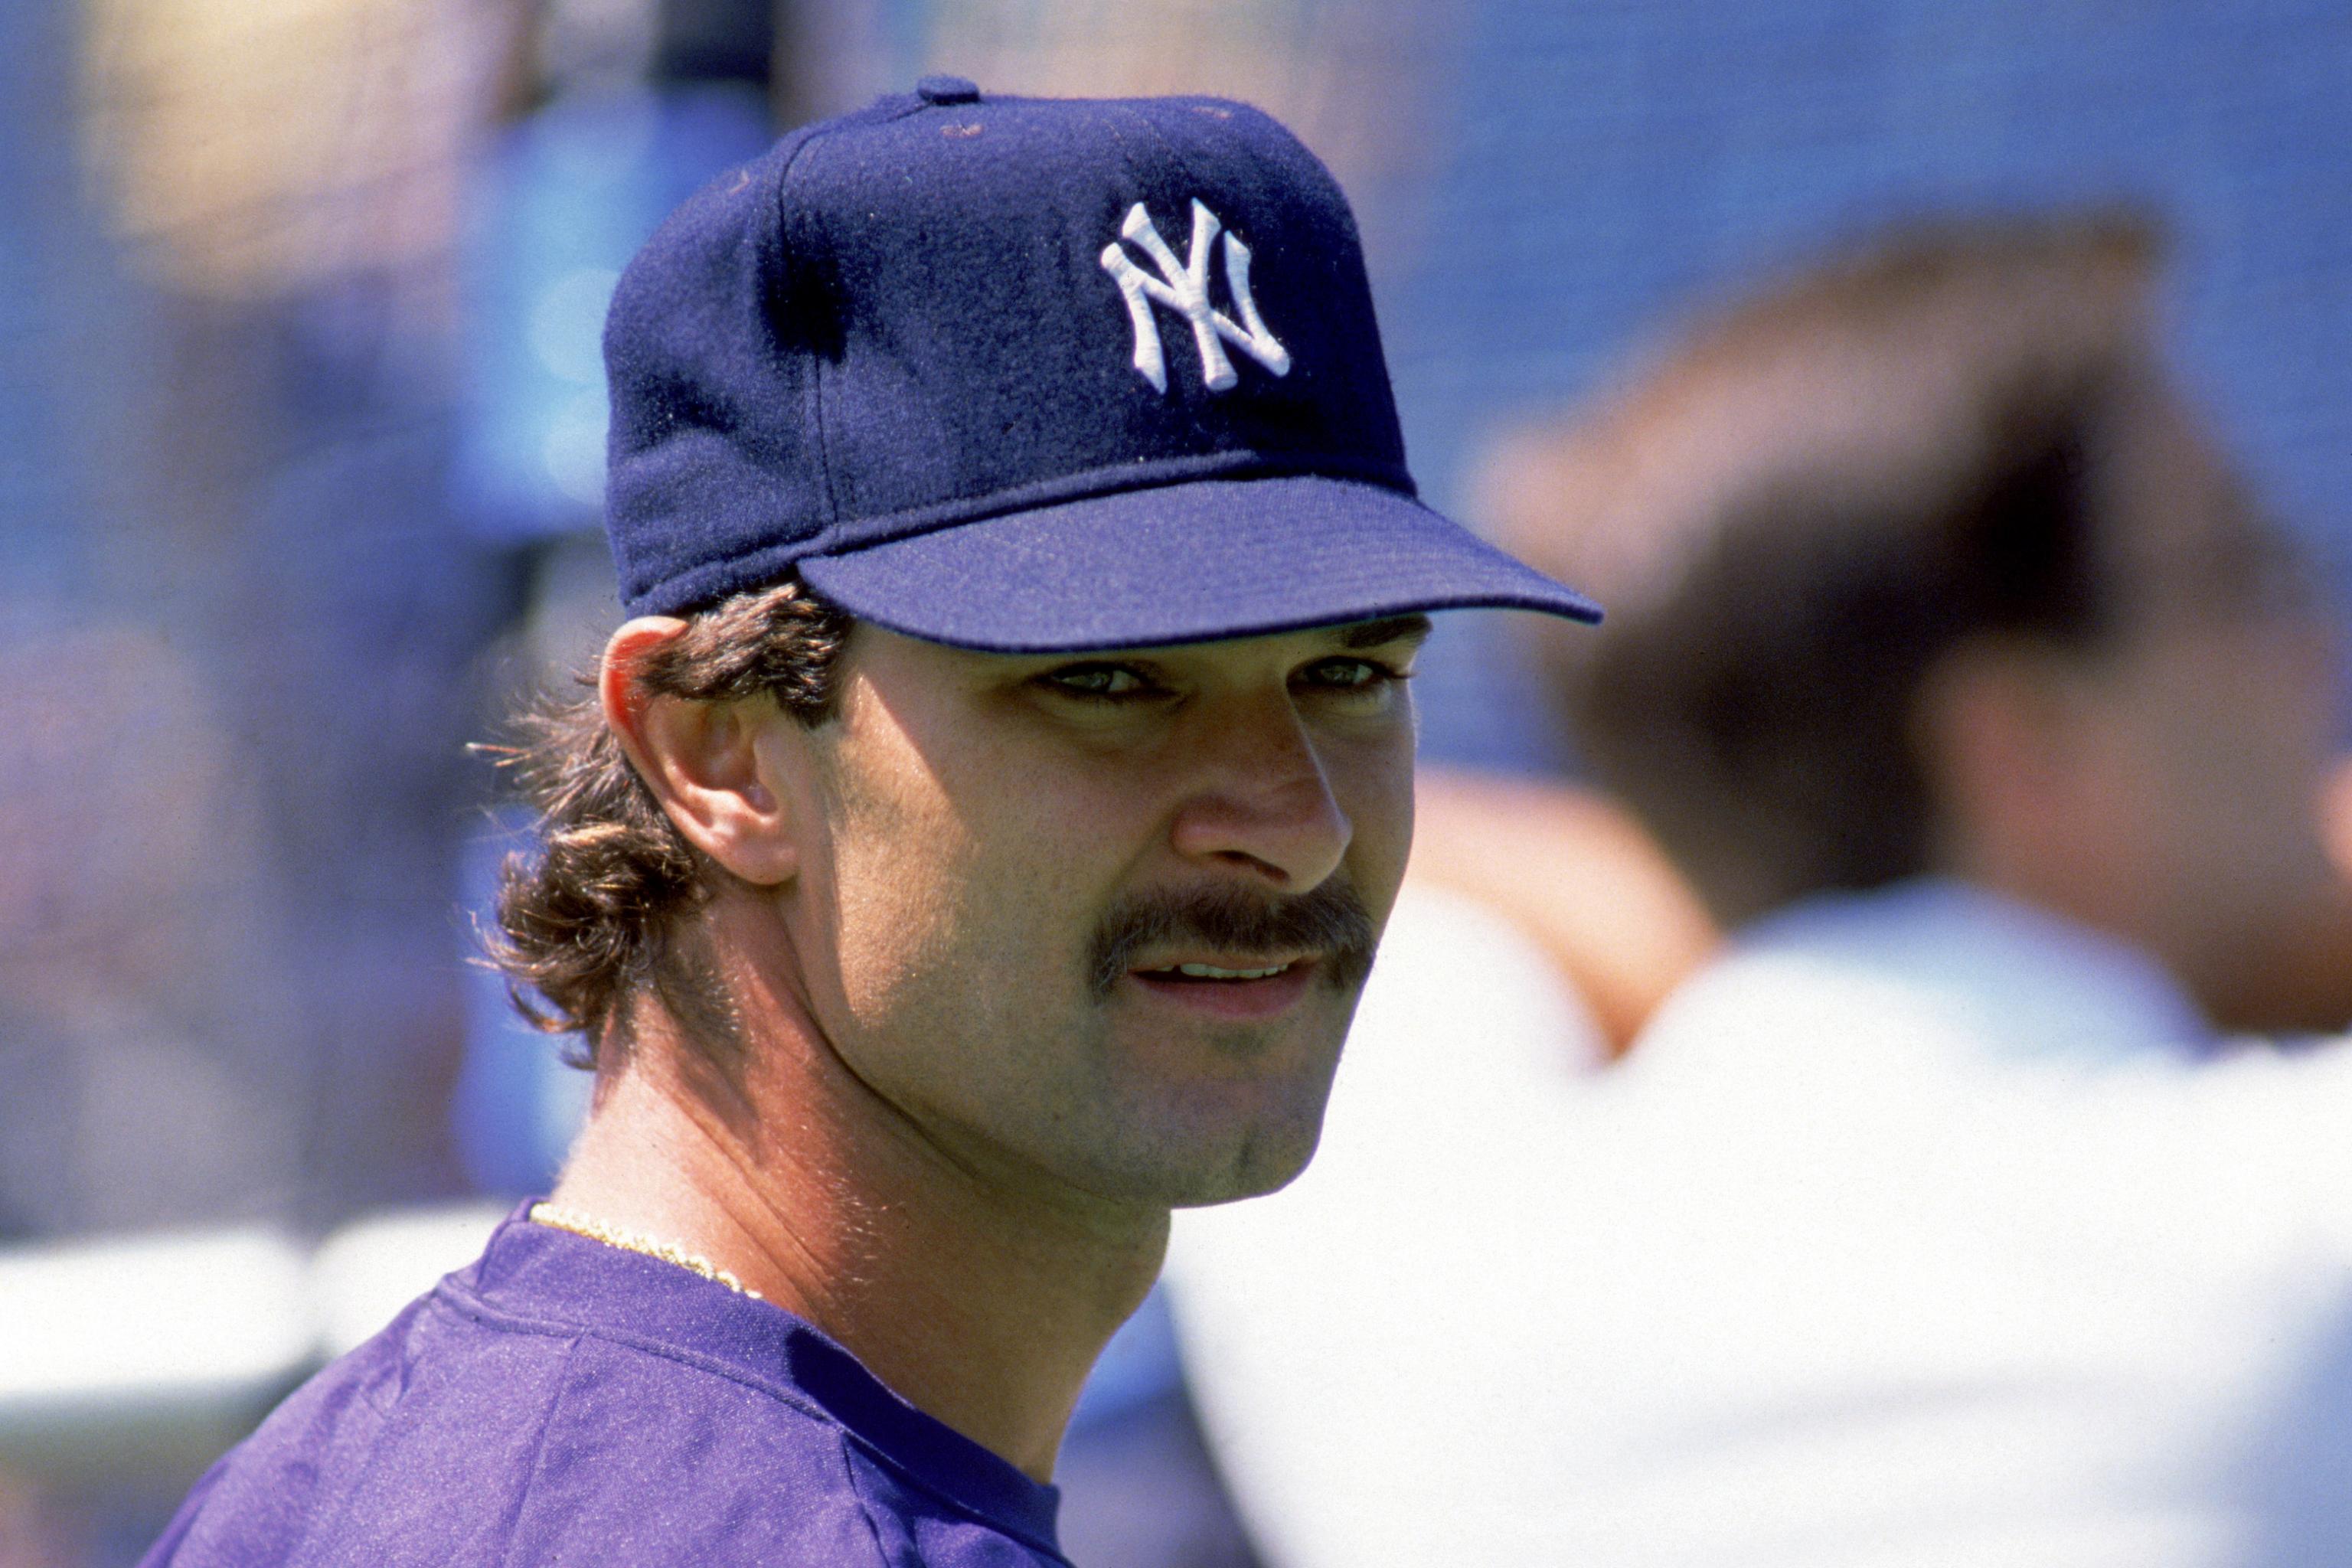 Don Mattingly: What a Young New York Yankees Fan Saw That Made